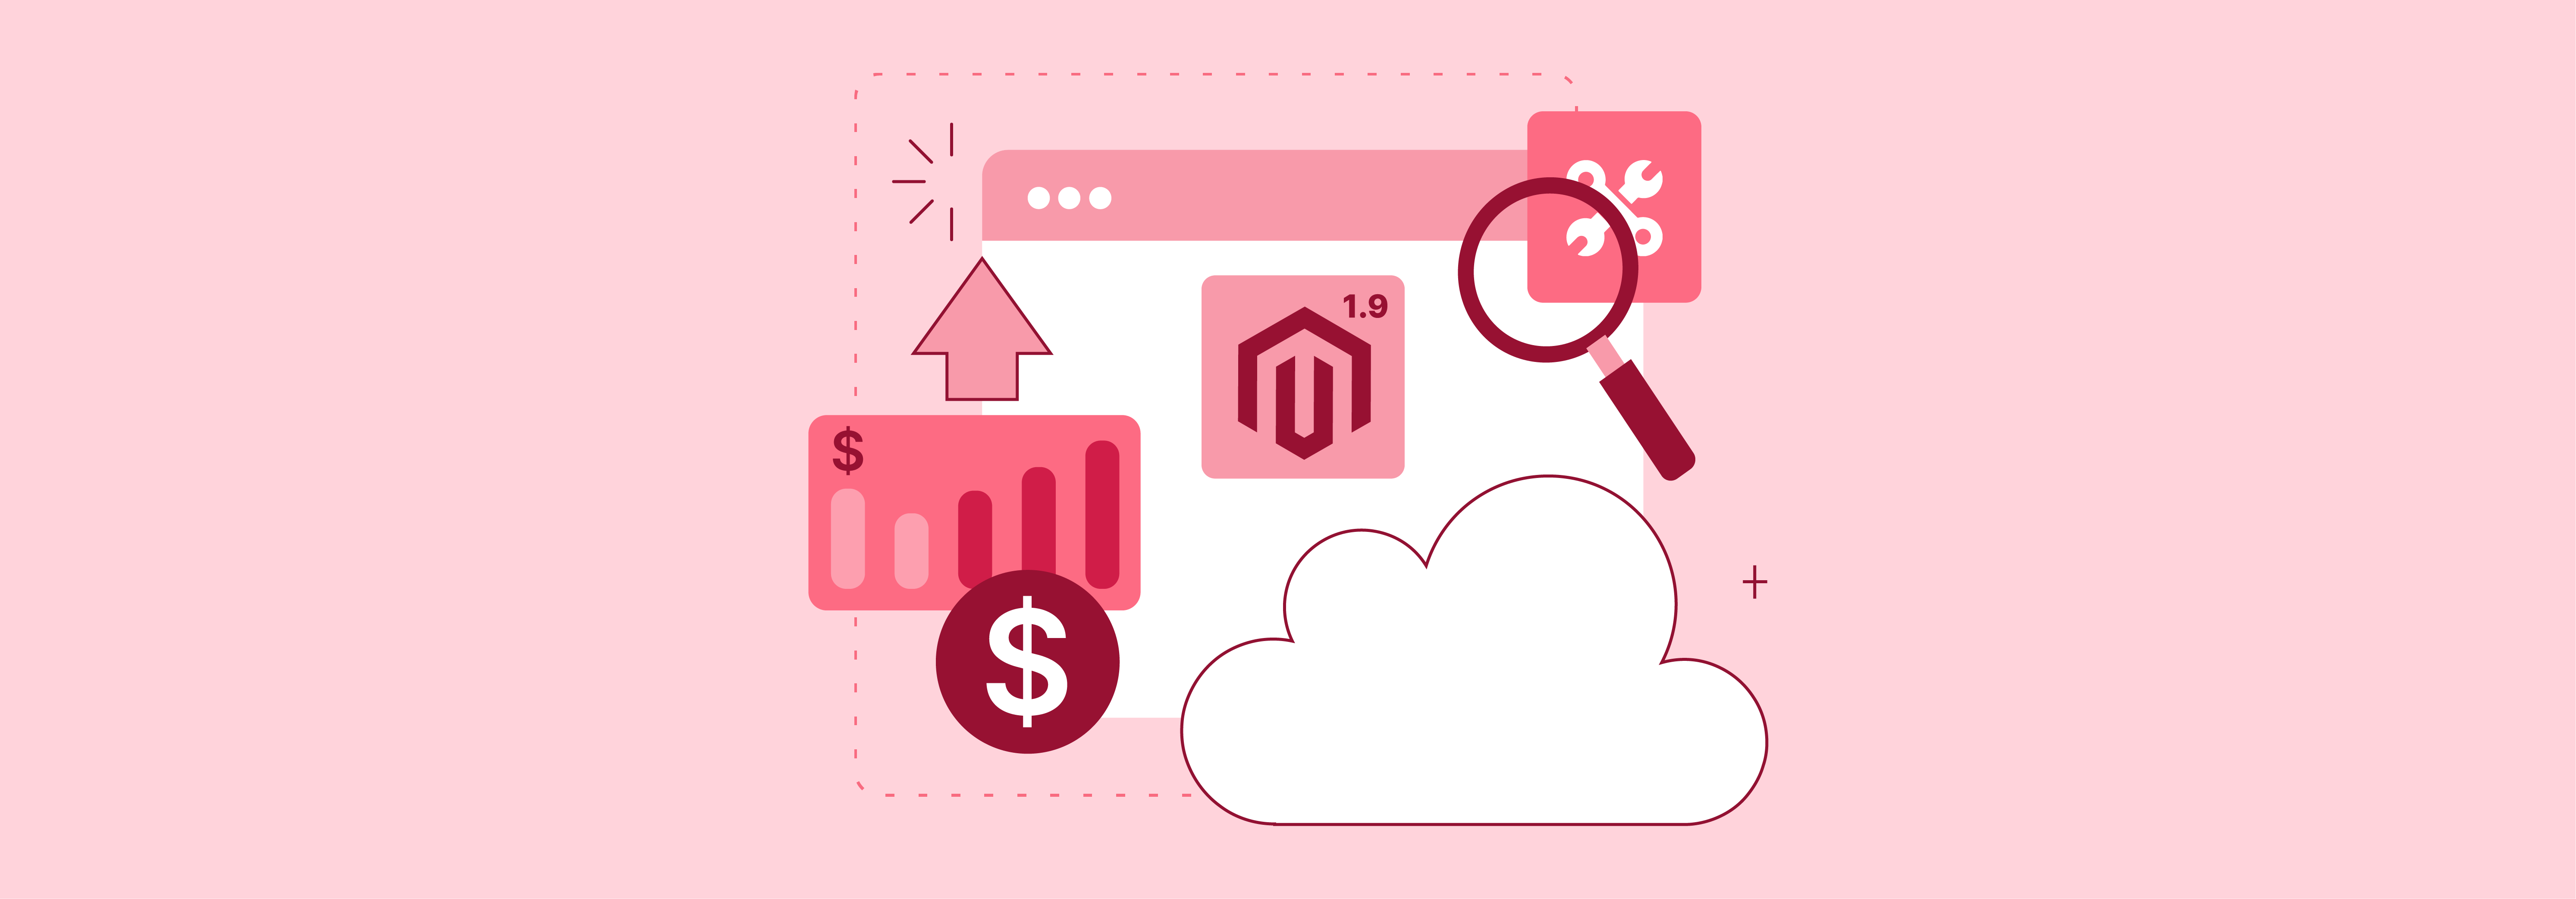 Cost Breakdown for Magento 1.9 Cloud Hosting - Setup and Monthly Fees